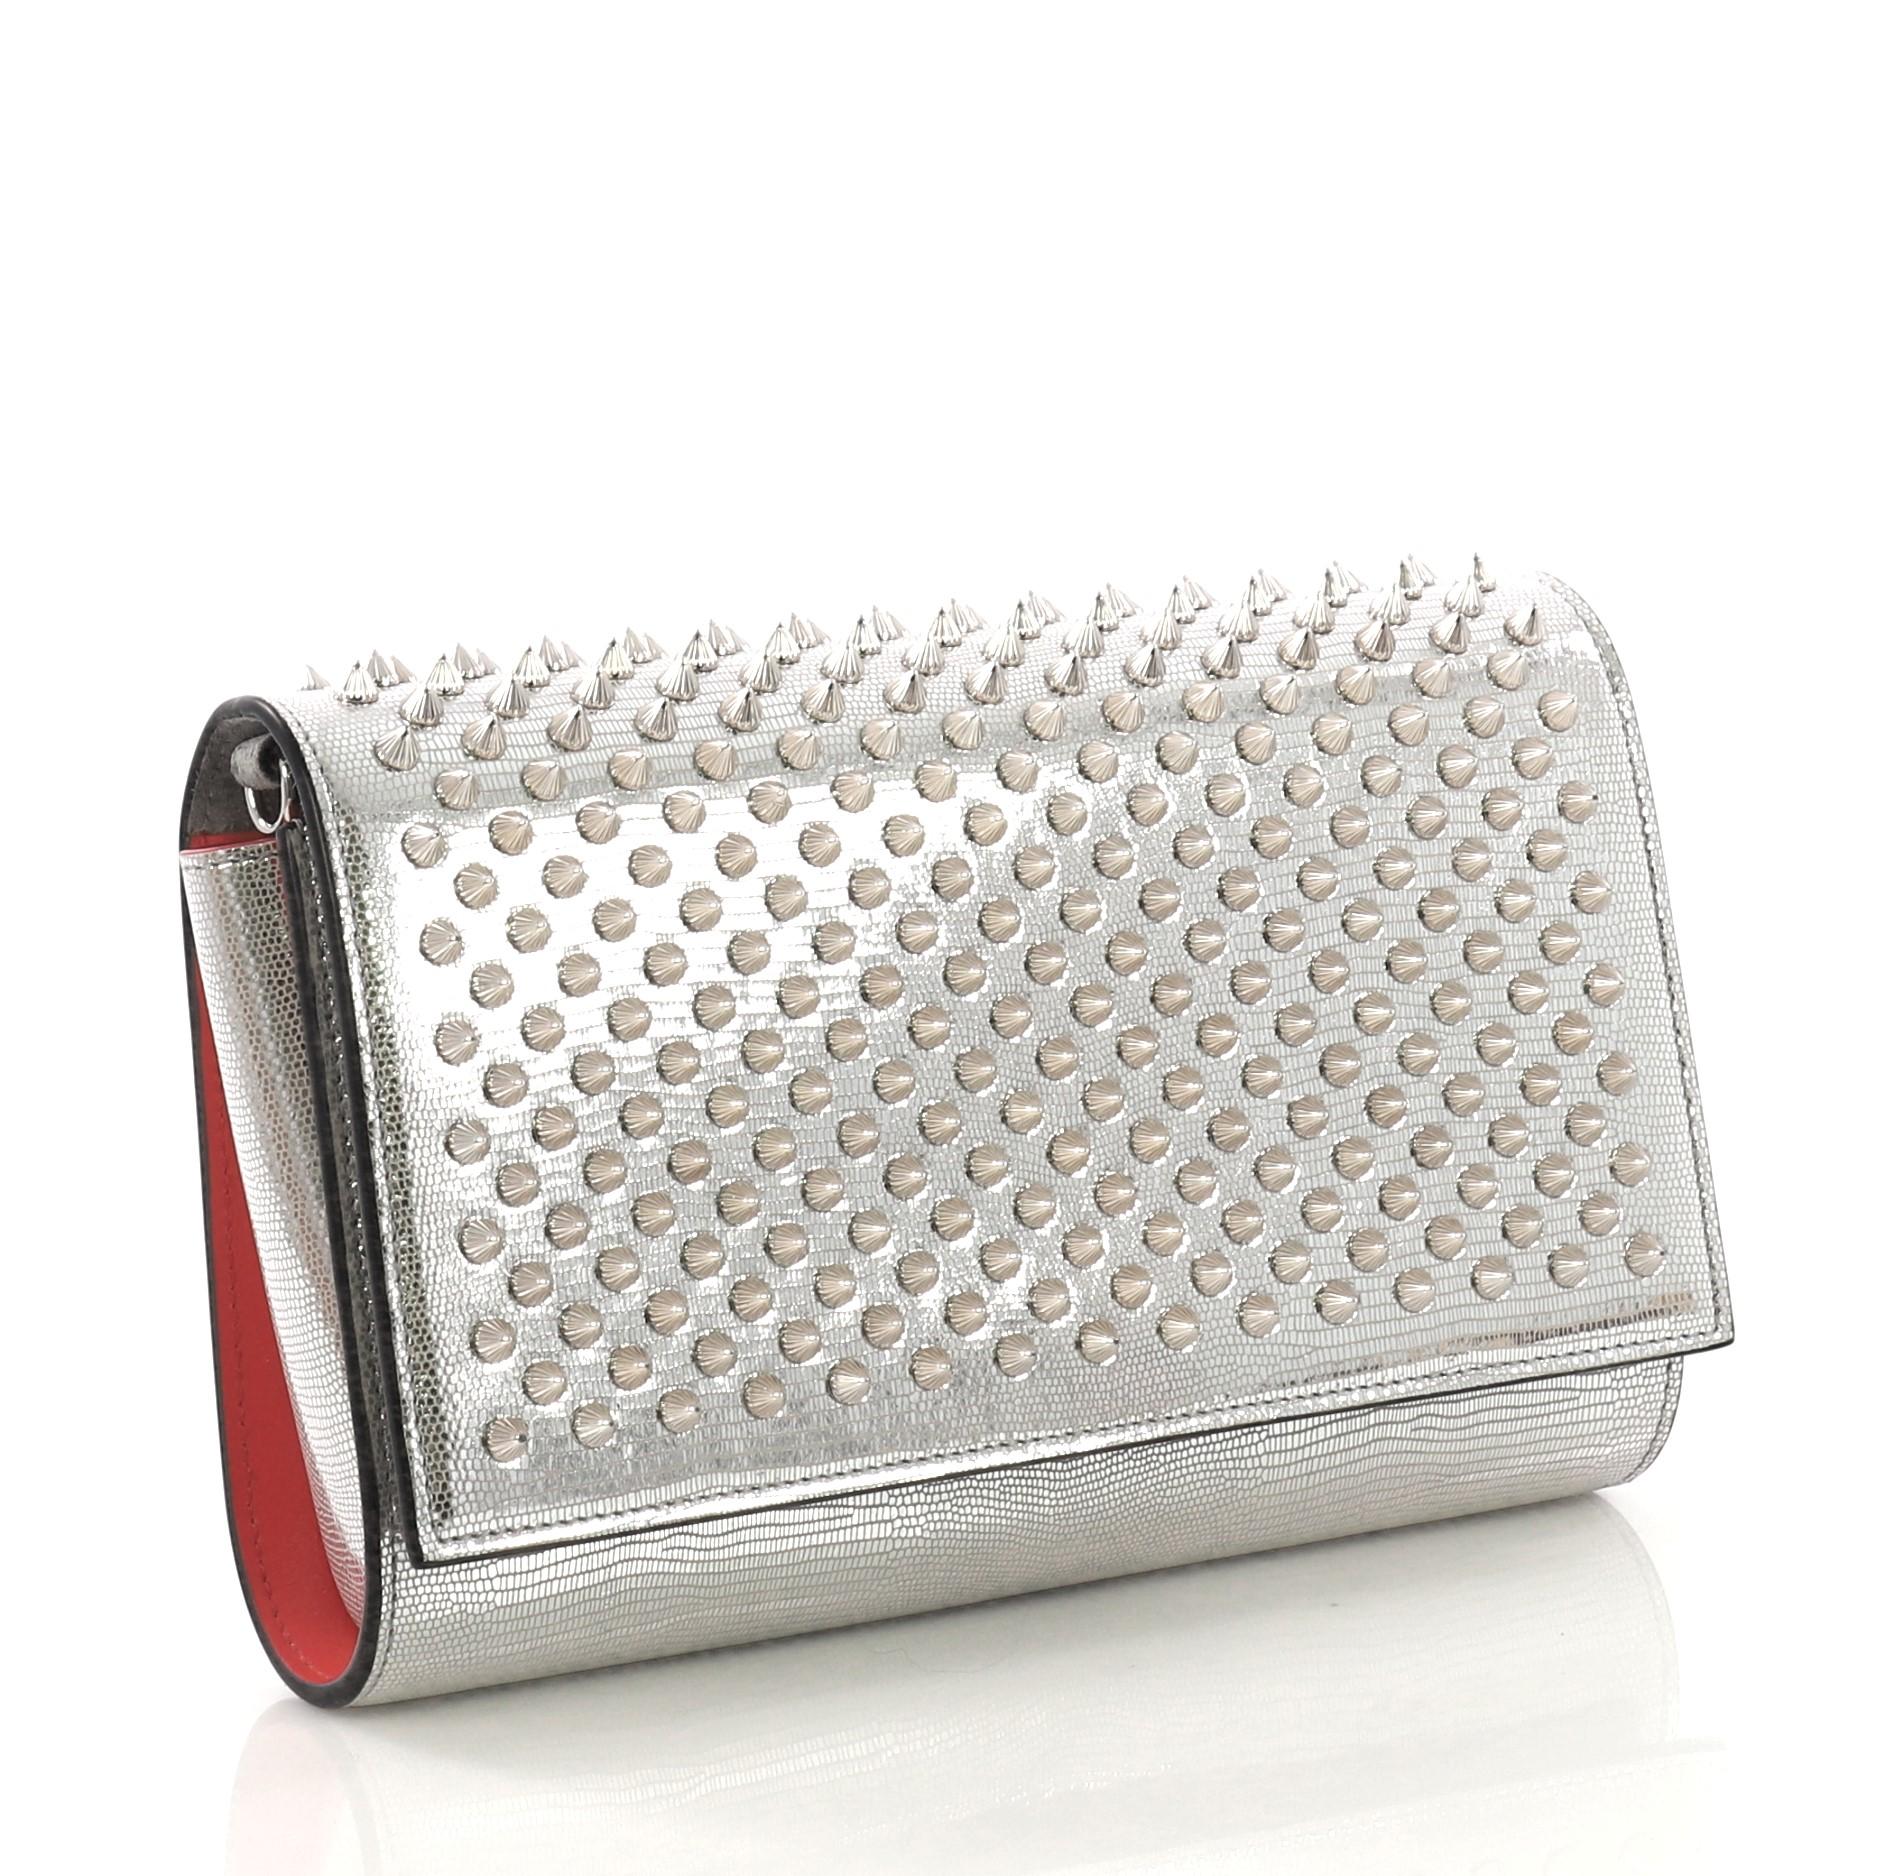 Gray Christian Louboutin Paloma Clutch Spiked Leather